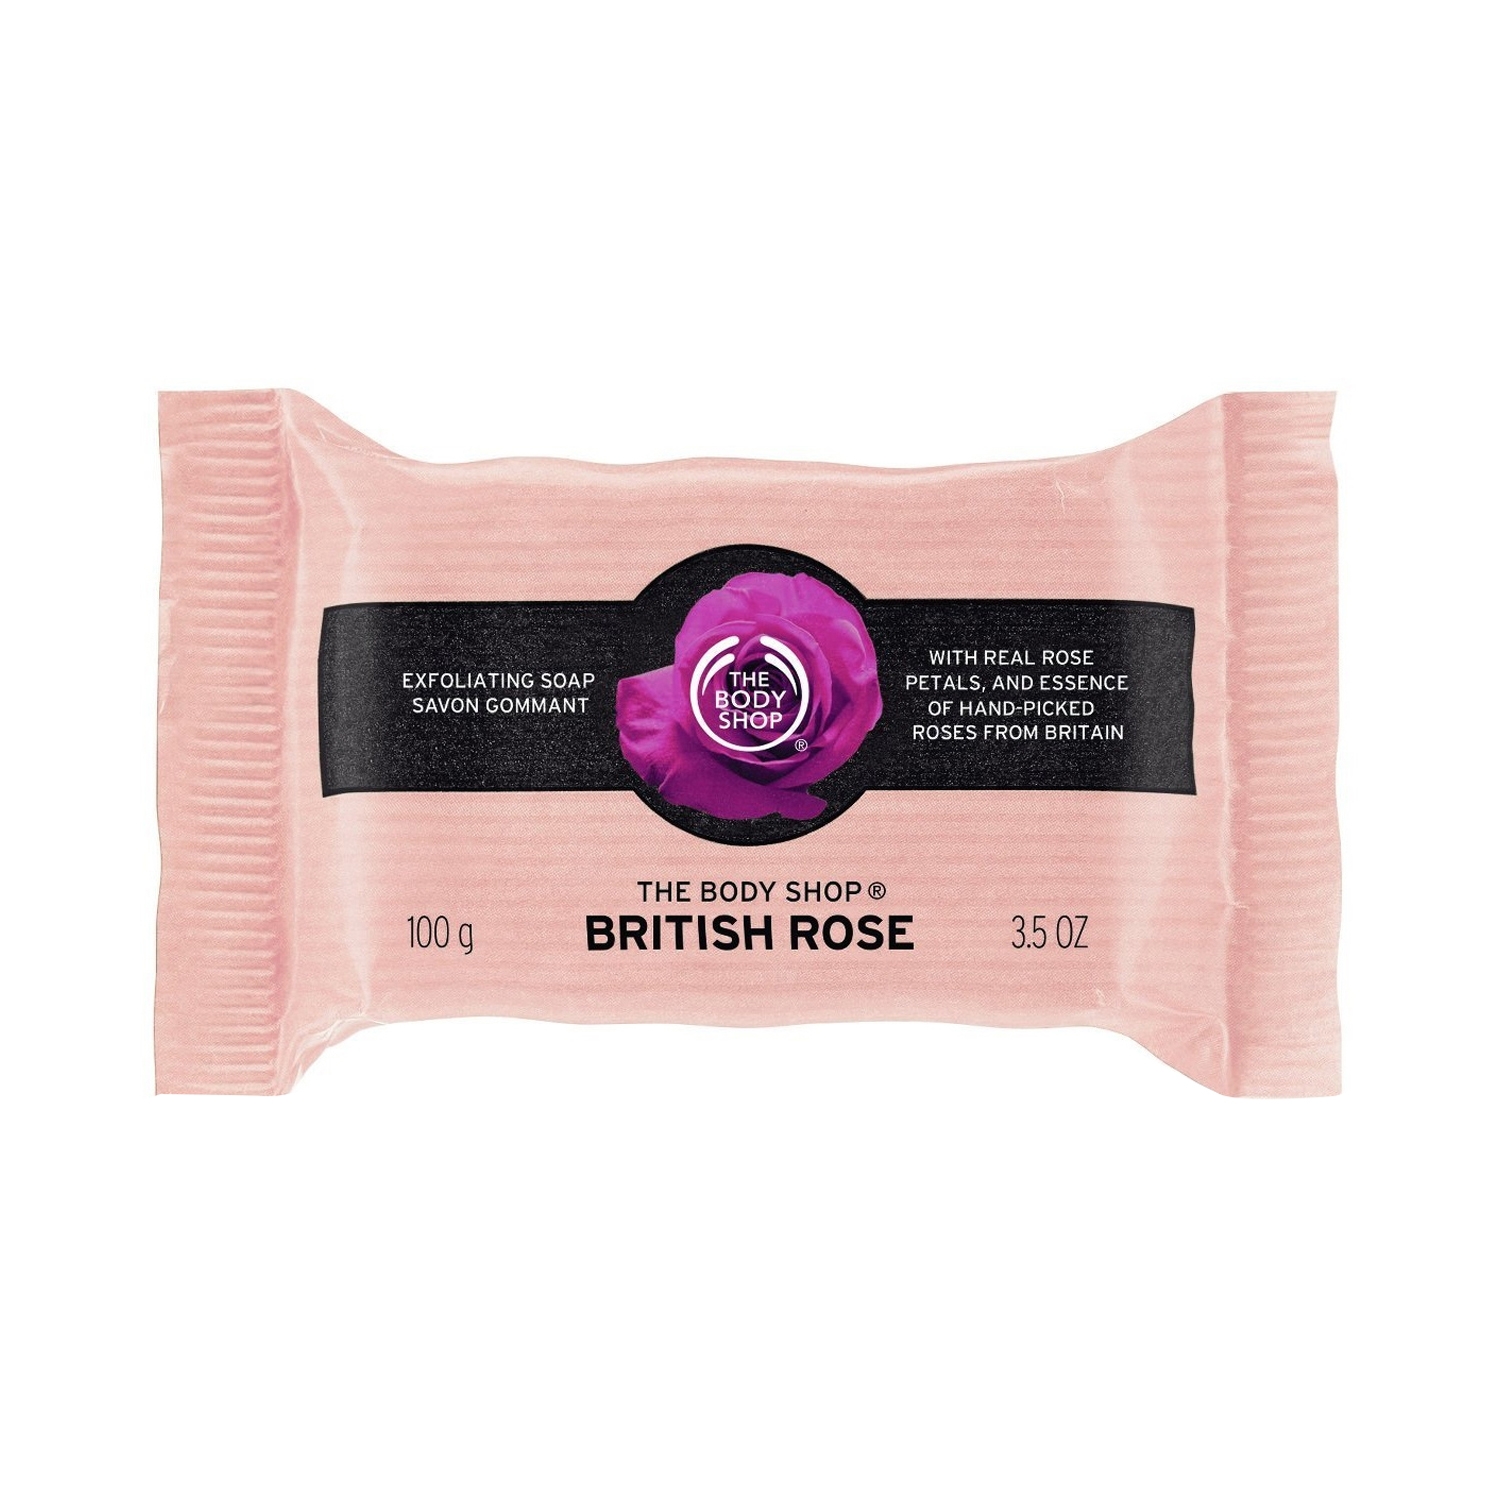 The Body Shop | The Body Shop British Rose Exfoliating Soap (100g)